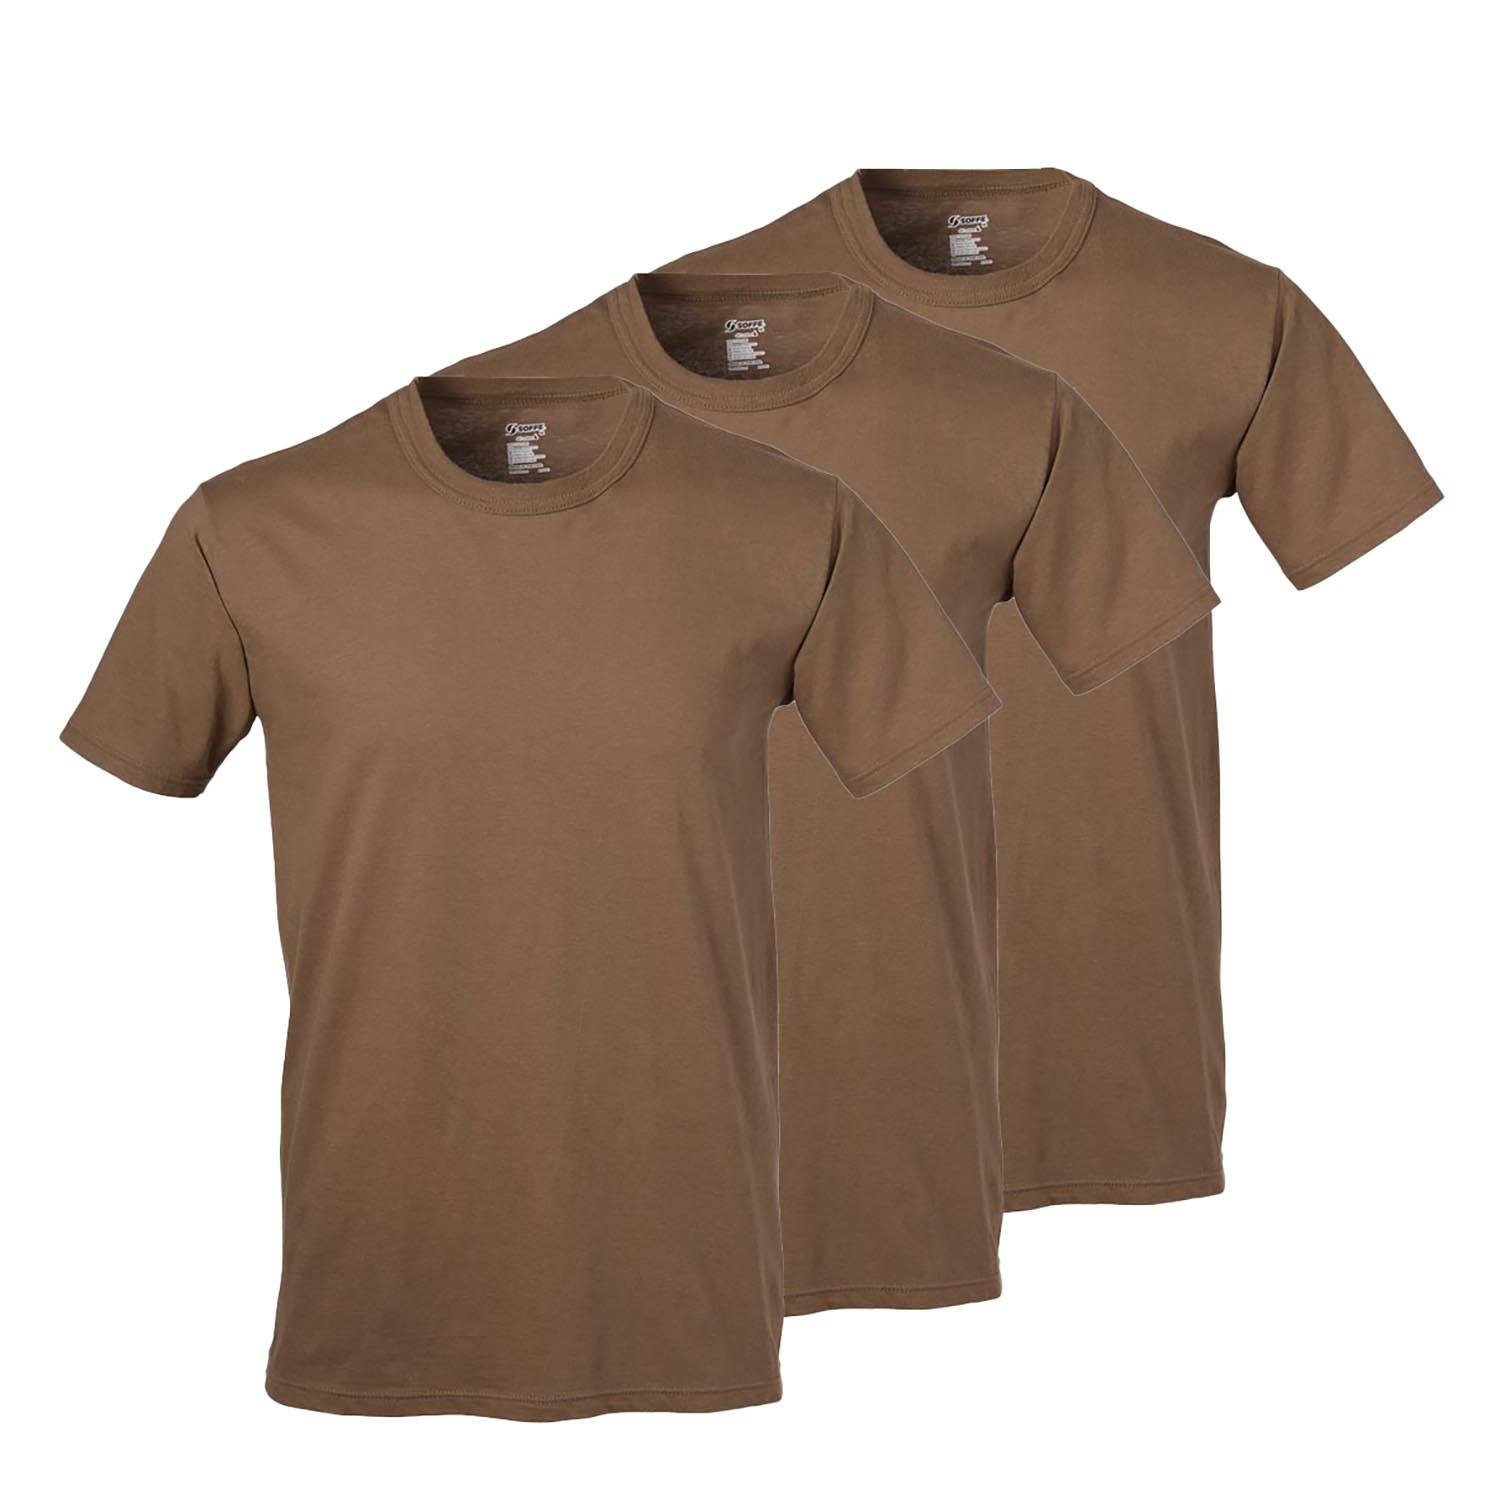 SOFFE 100% COTTON MILITARY T-SHIRT, 3 PACK